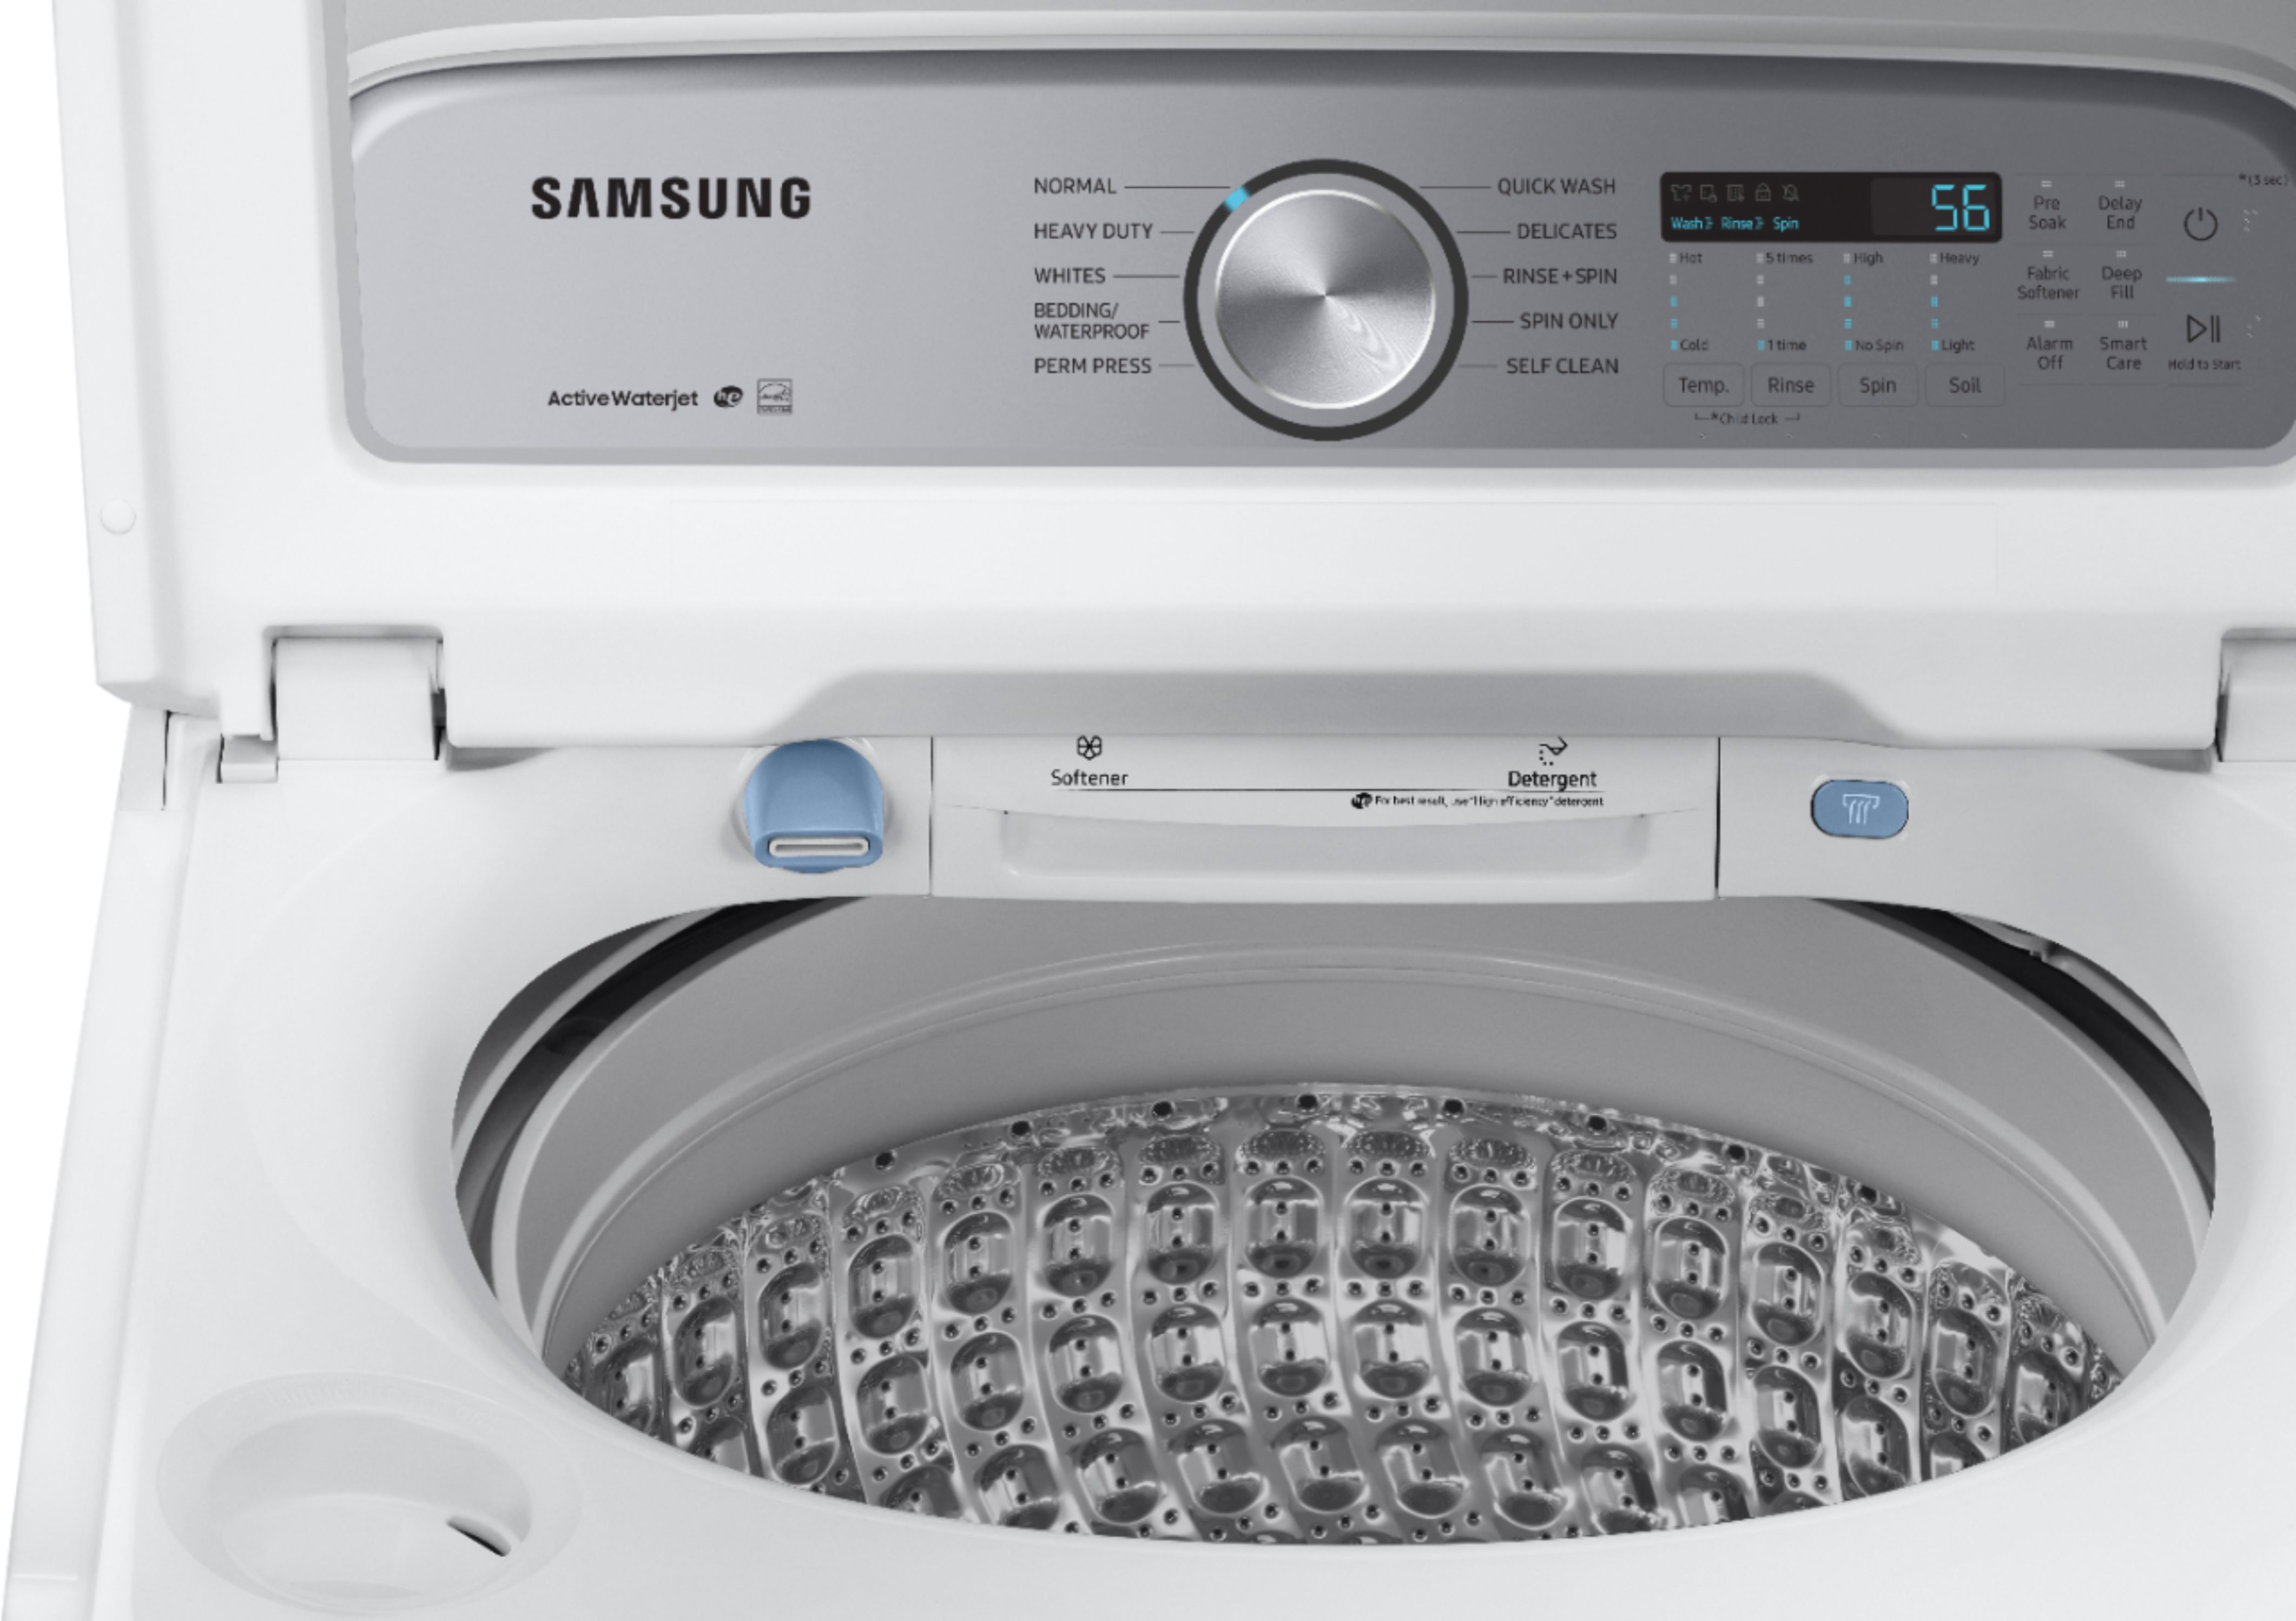 Samsung 5 0 Cu Ft High Efficiency Top Load Washer With Active Waterjet White Wa50r50aw Us Best Buy